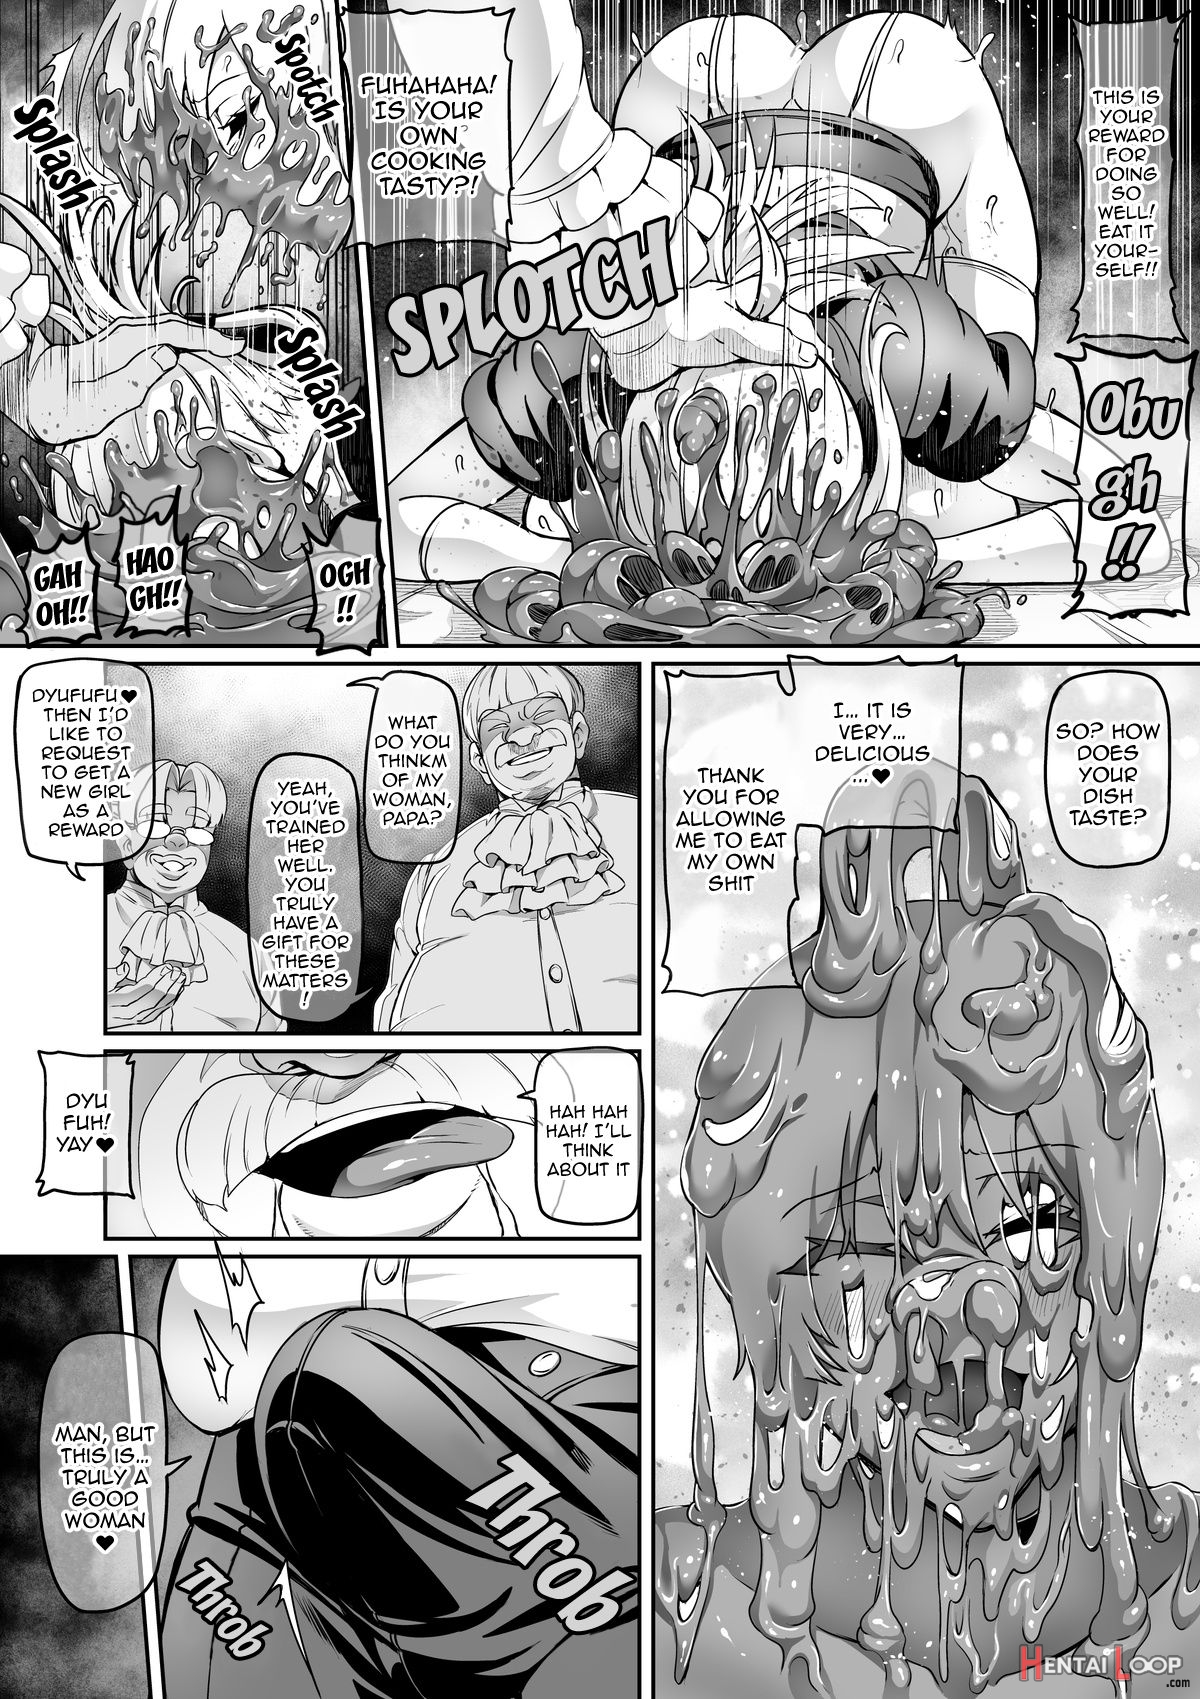 Demon Slaying Battle Princess Cecilia If Lunaria And The Trap Of The Perverted Royal Family ~feces Serving Edition~ page 5